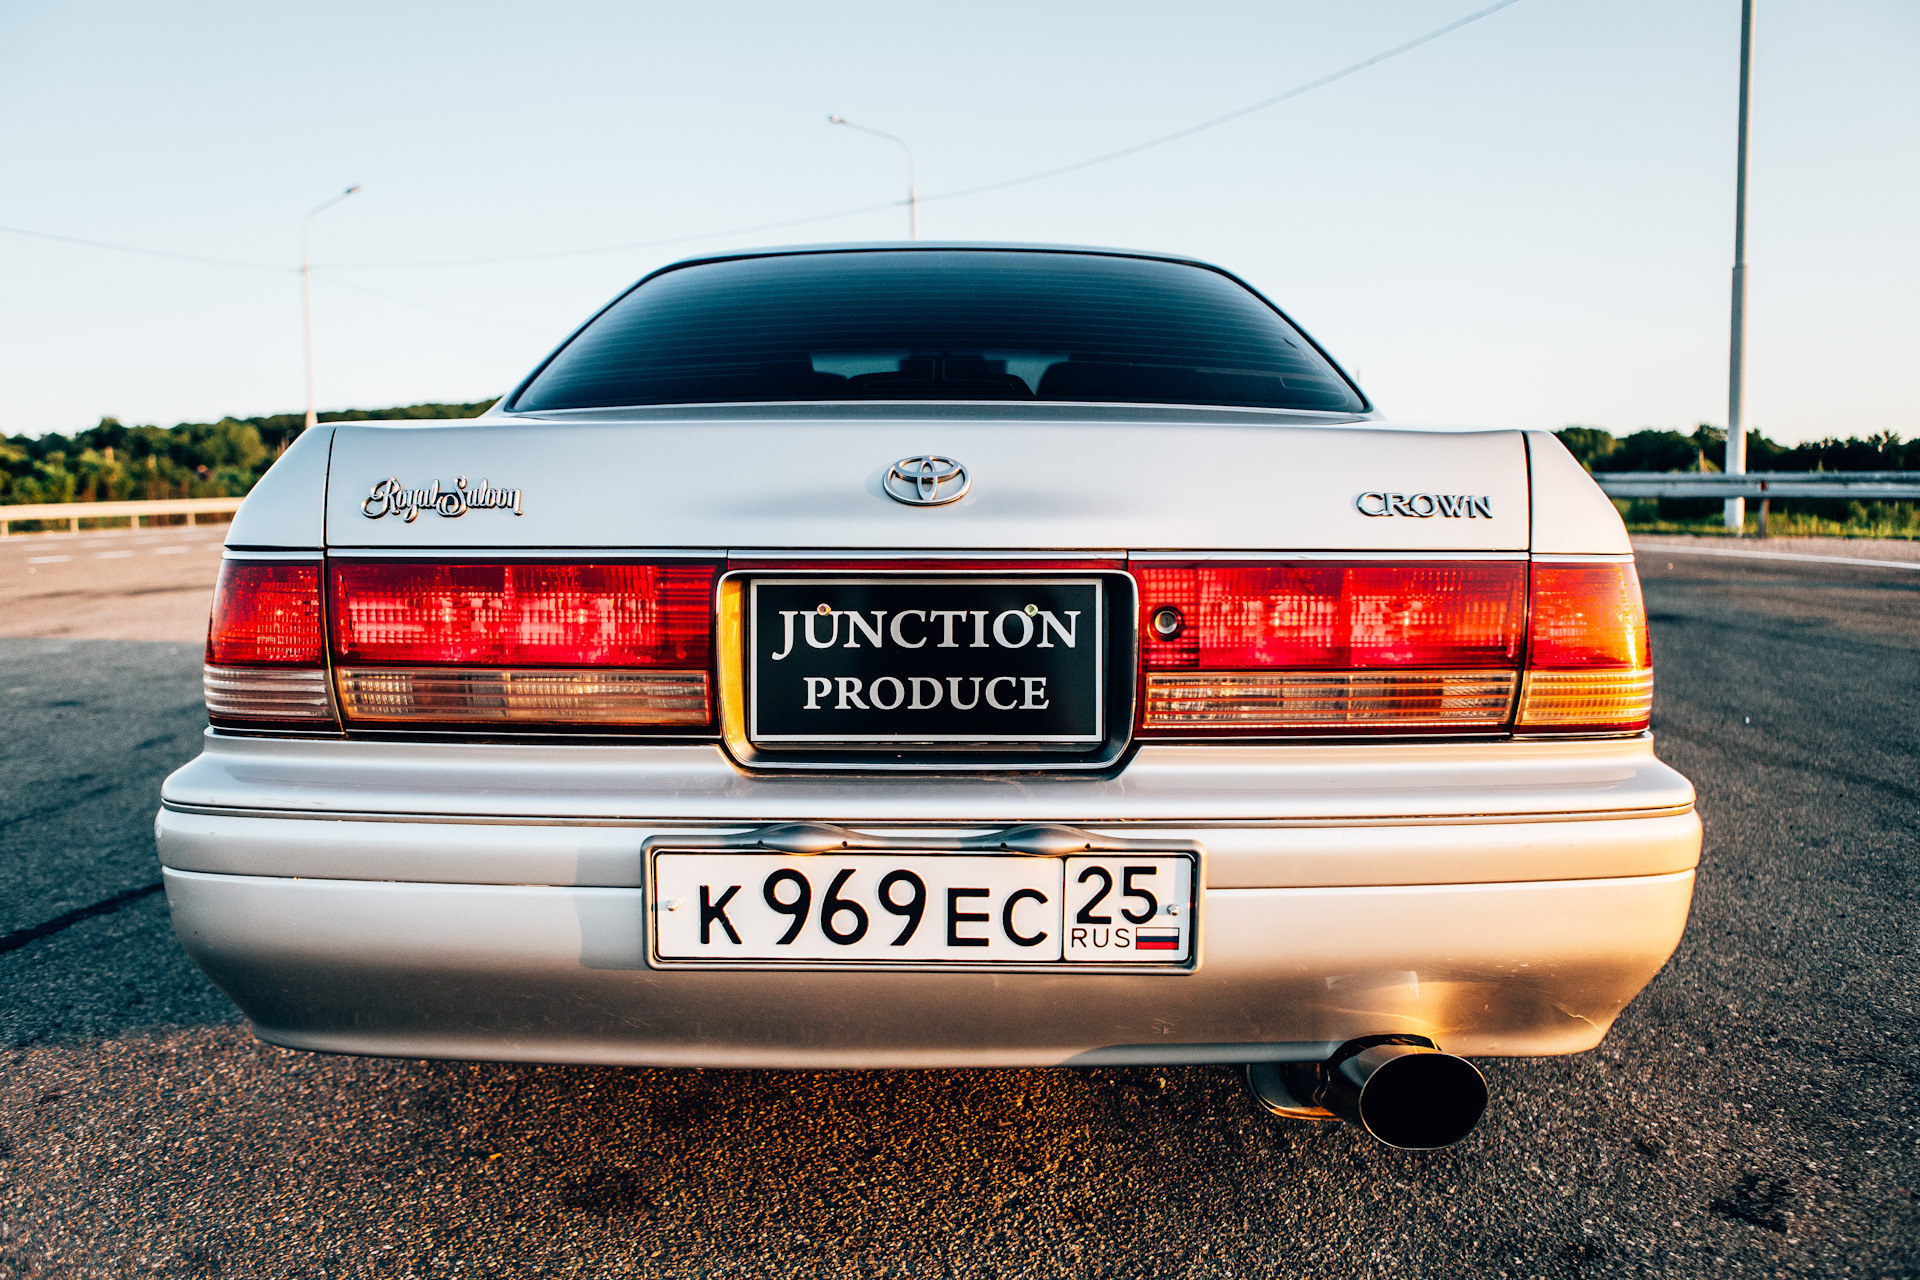 Toyota Crown s140 Junction produce